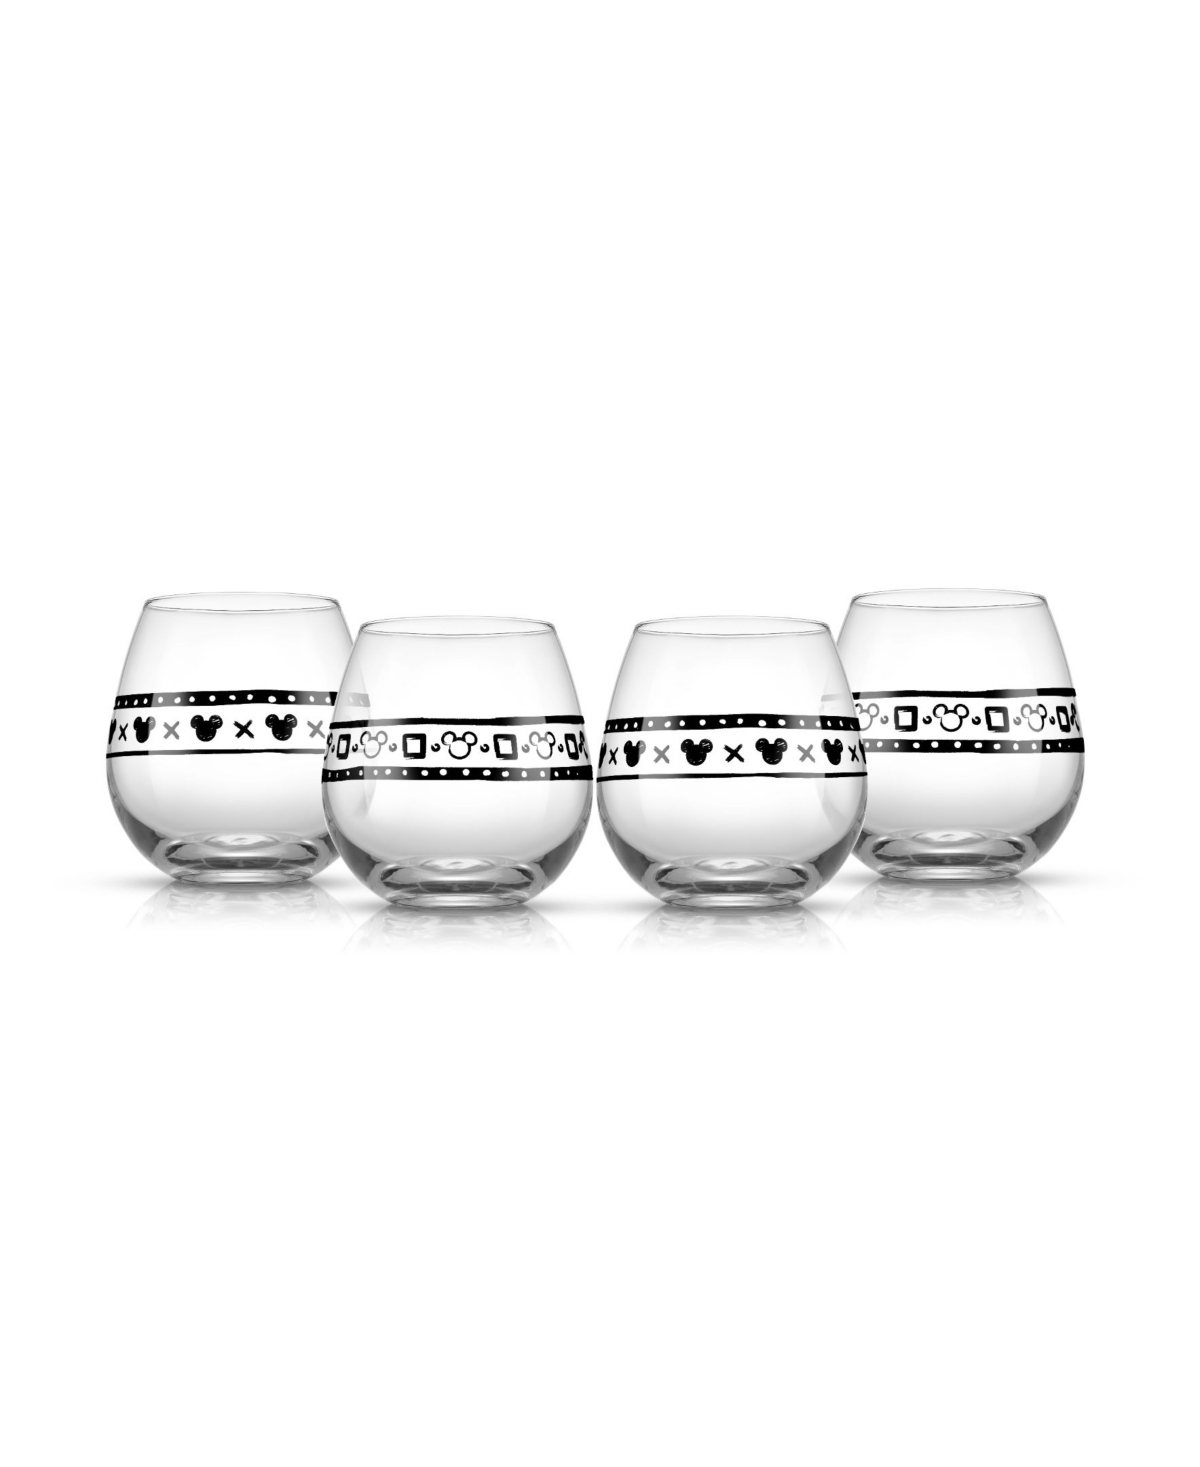 Joyjolt Disney Geo Picnic Mickey Mouse 15 oz Stemless Wine Glasses Set, 4 Pieces In Clear